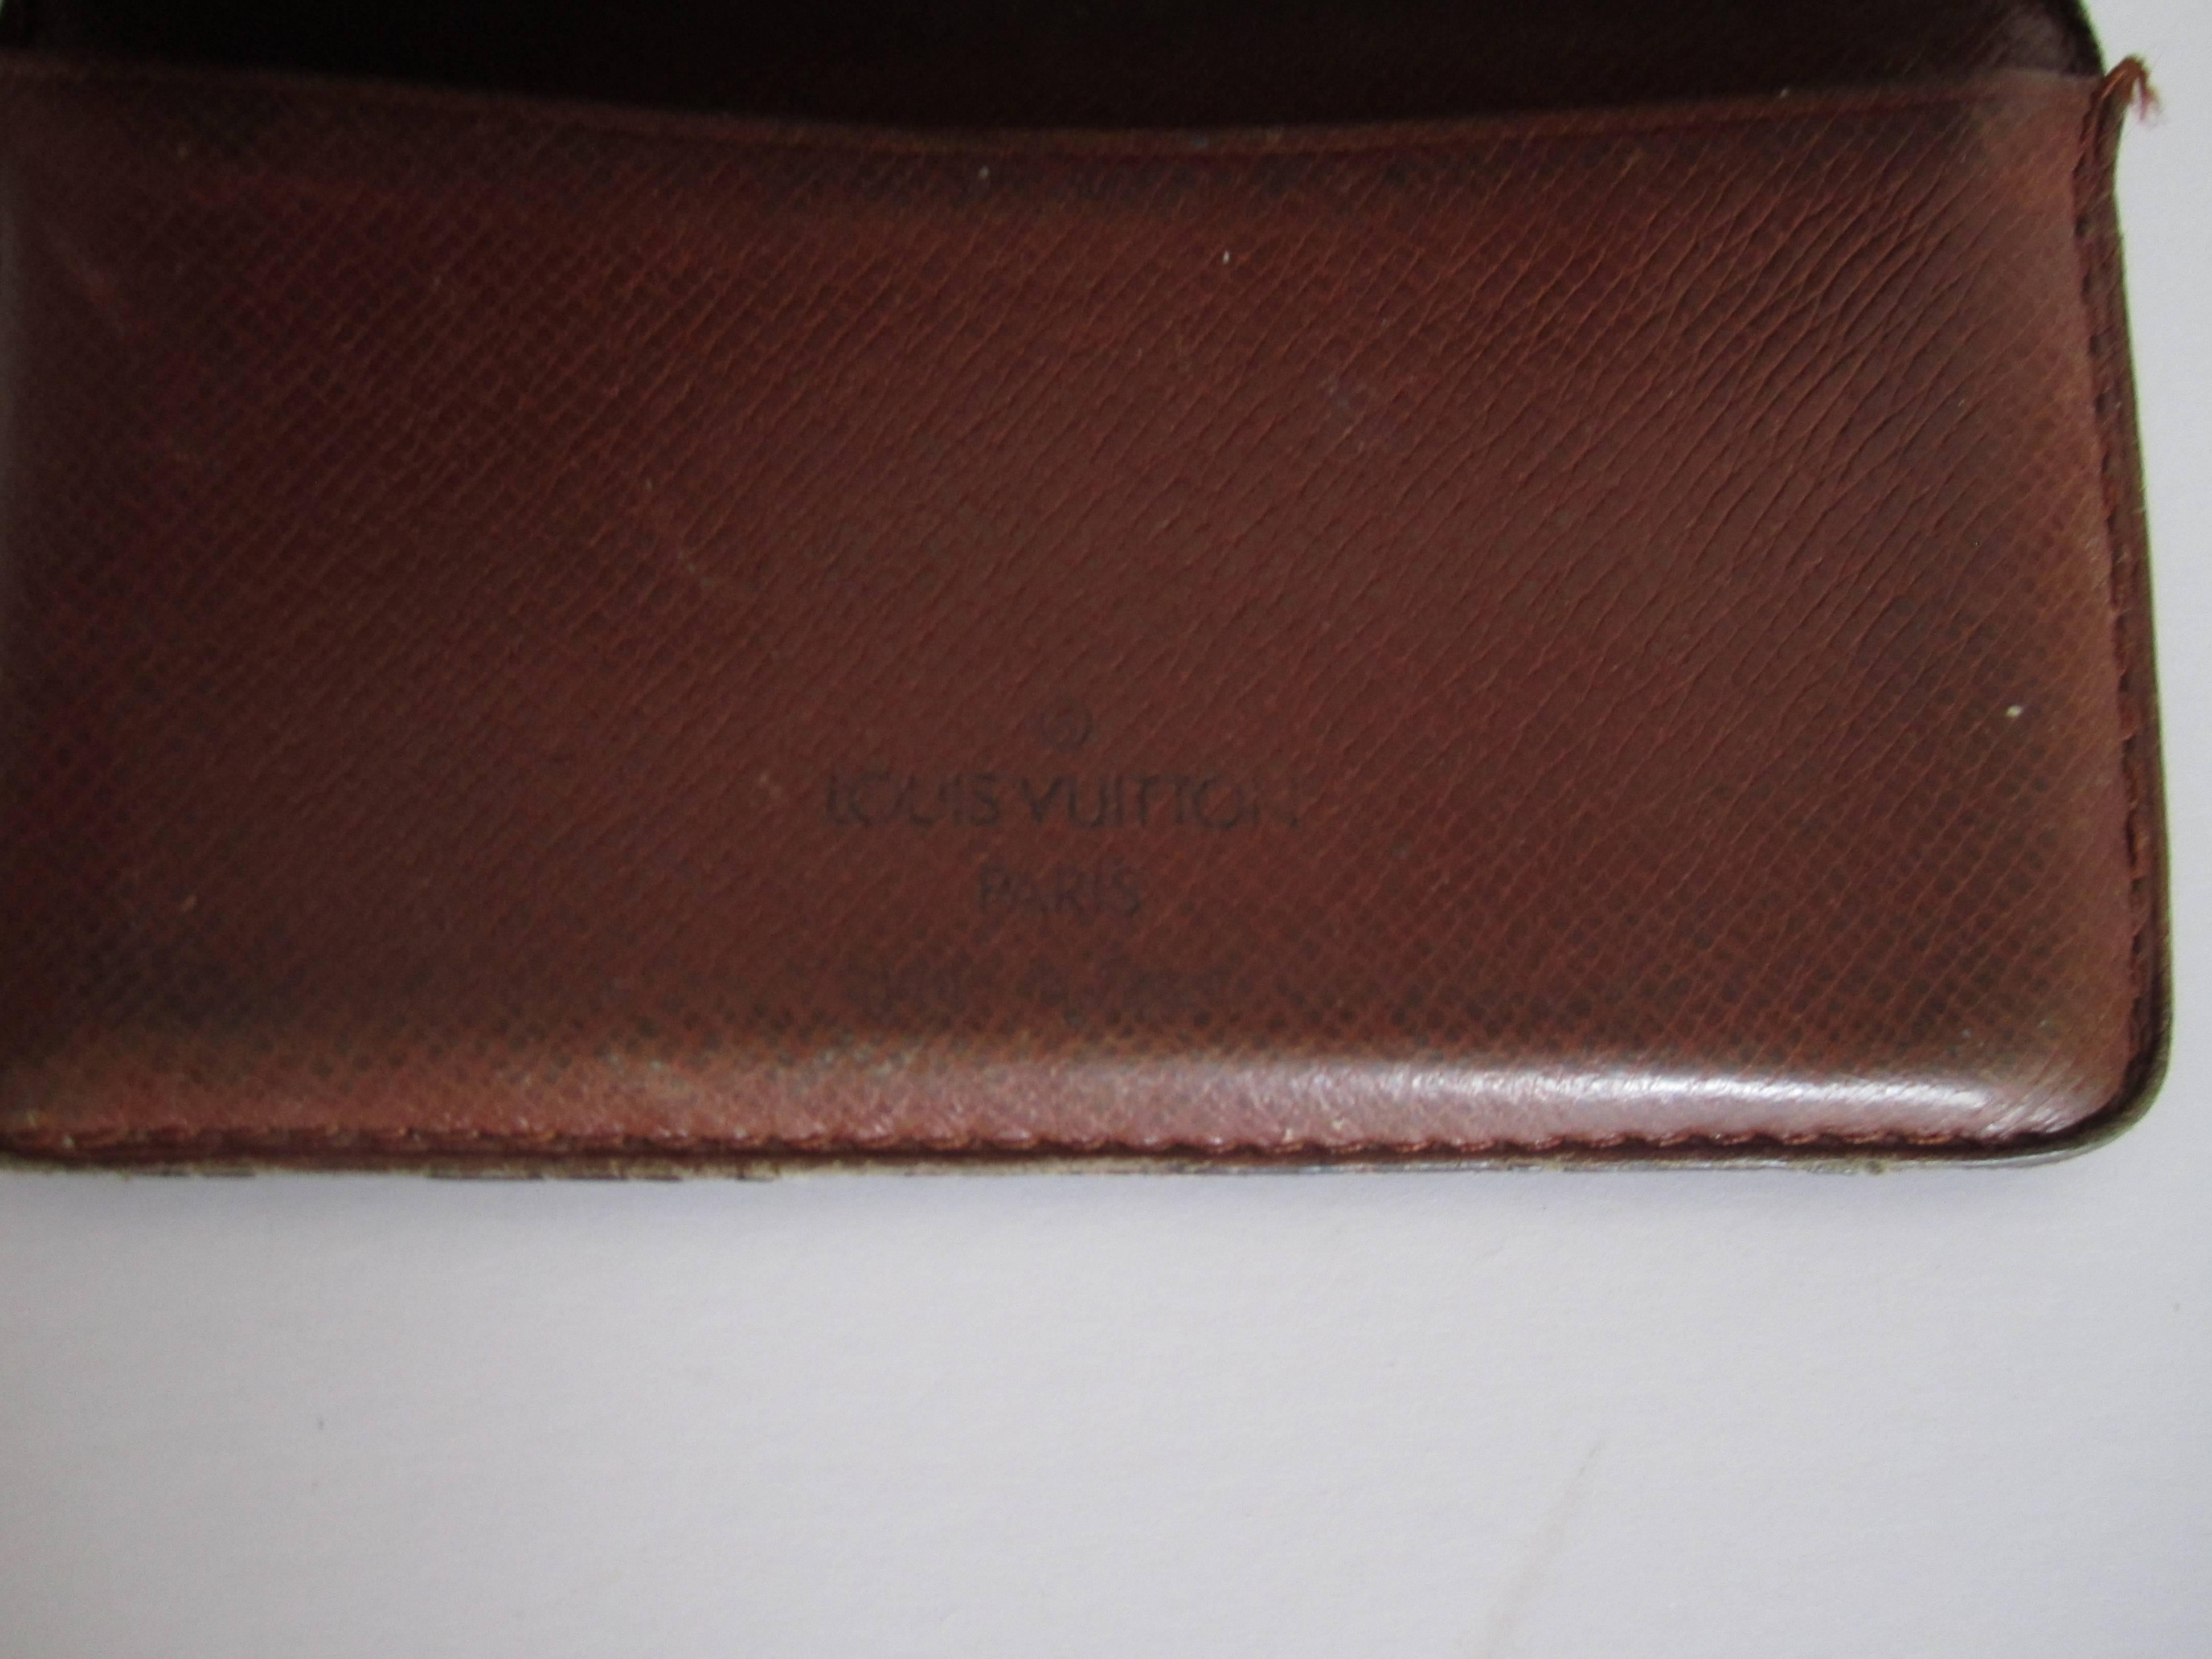 French LV Louis Vuitton Vintage Card Holder Case